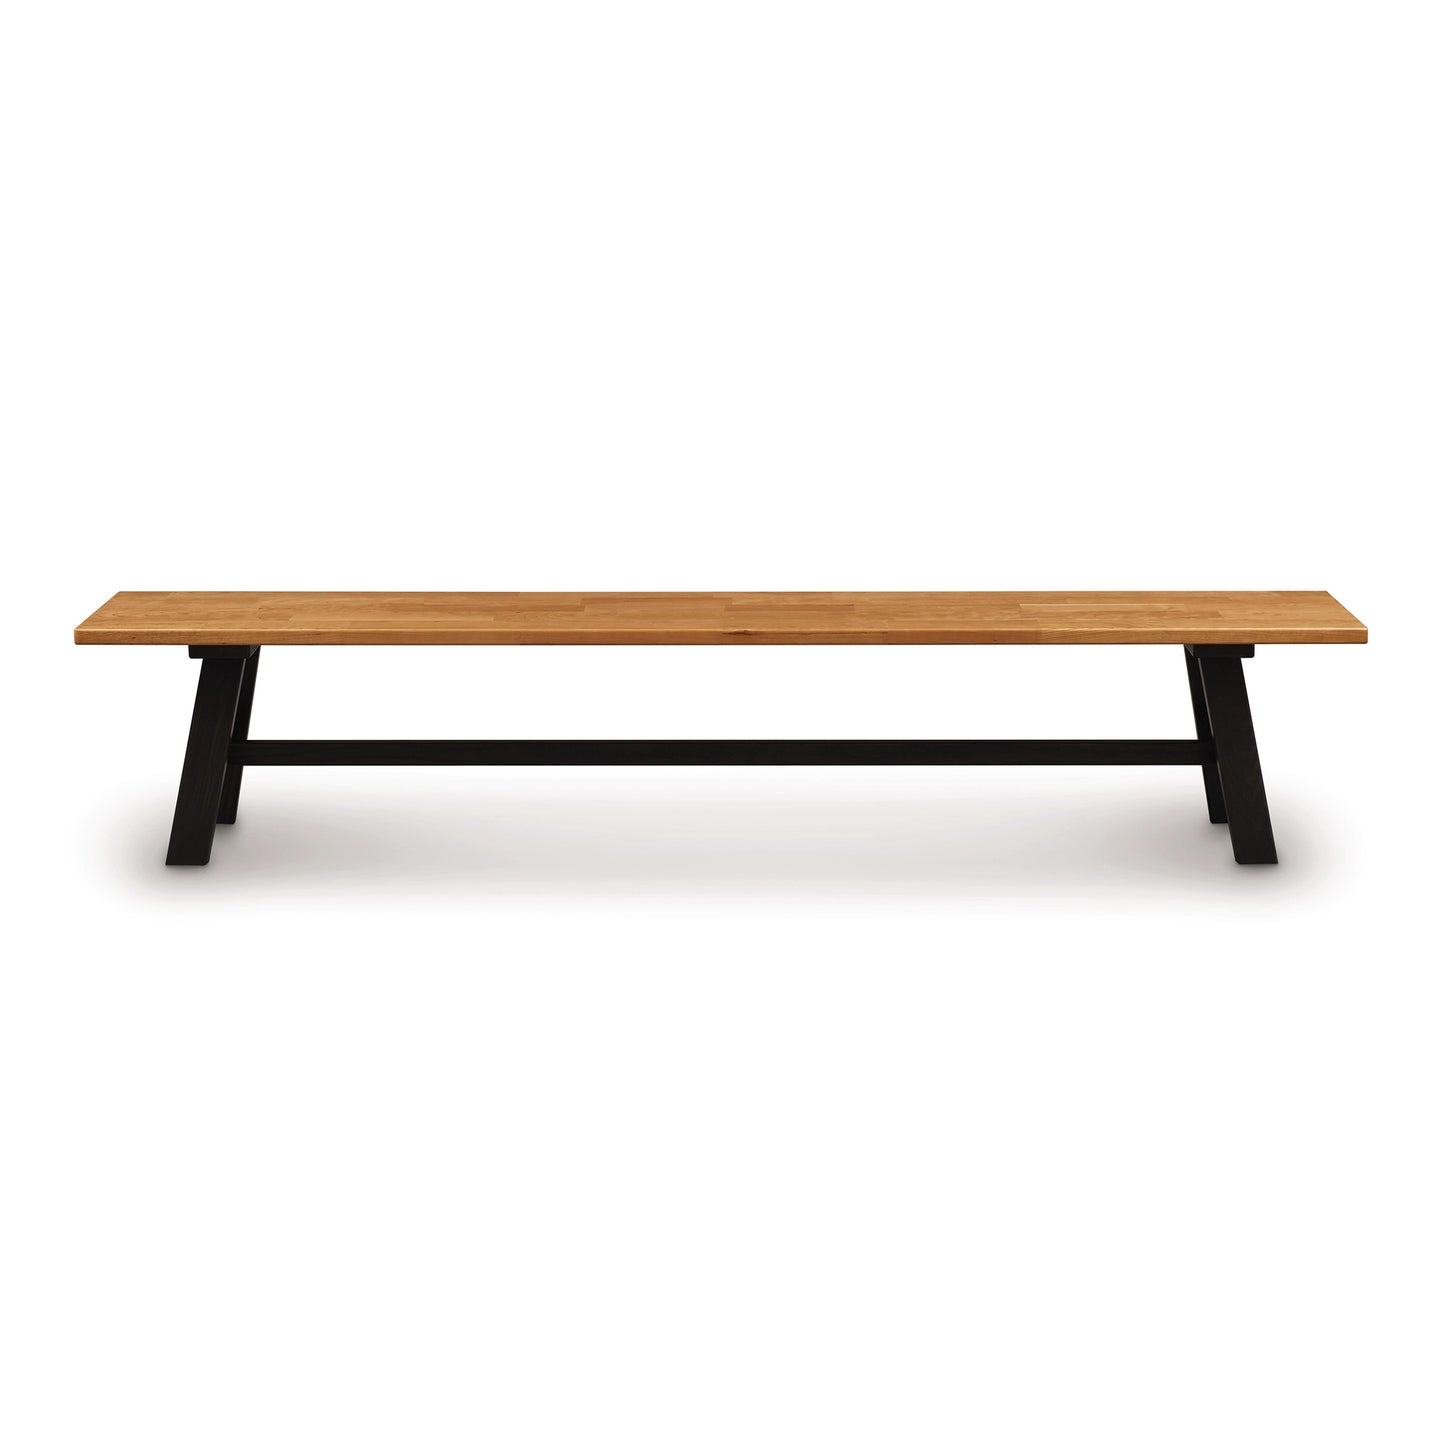 A Copeland Furniture modern farmhouse cherry bench with black metal legs on a white background.